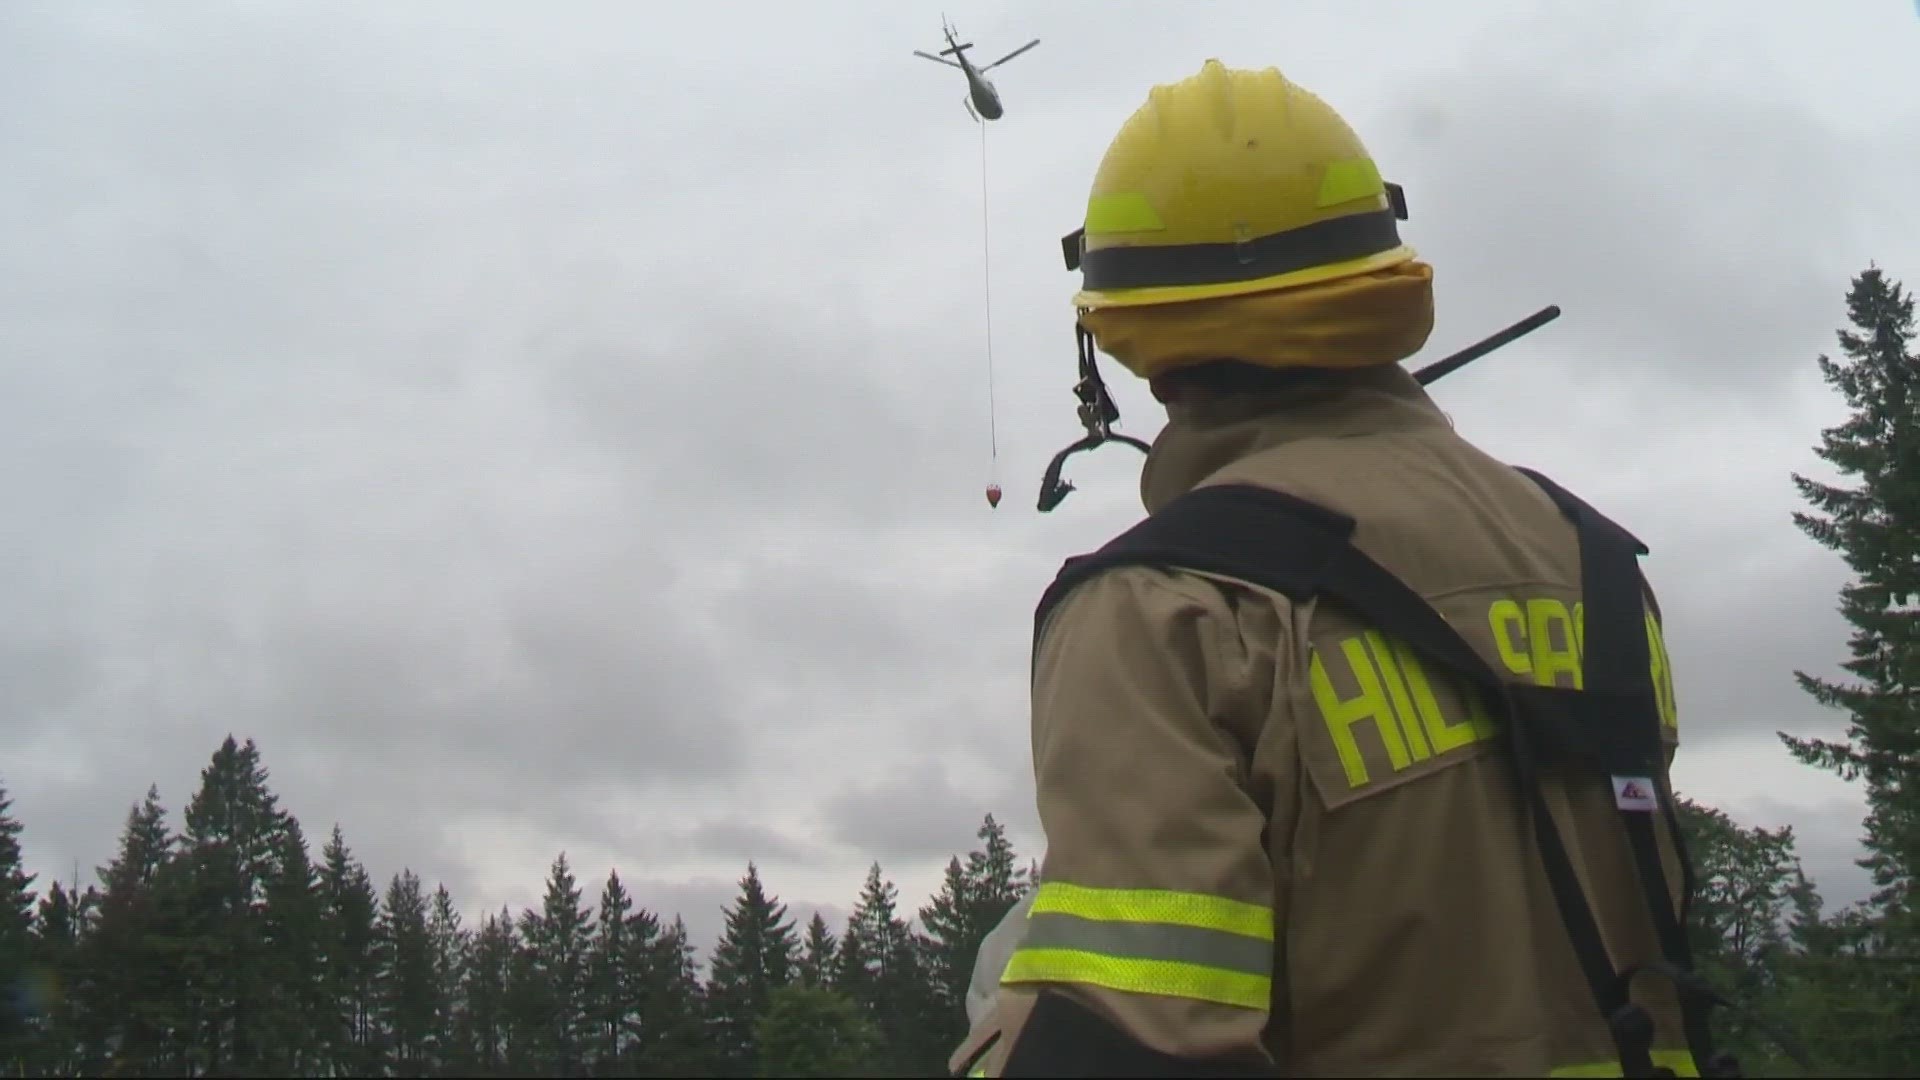 At the 12th annual Metro Advanced Wildland School, firefighters hone their skills by practicing different techniques on the ground in controlled situations.